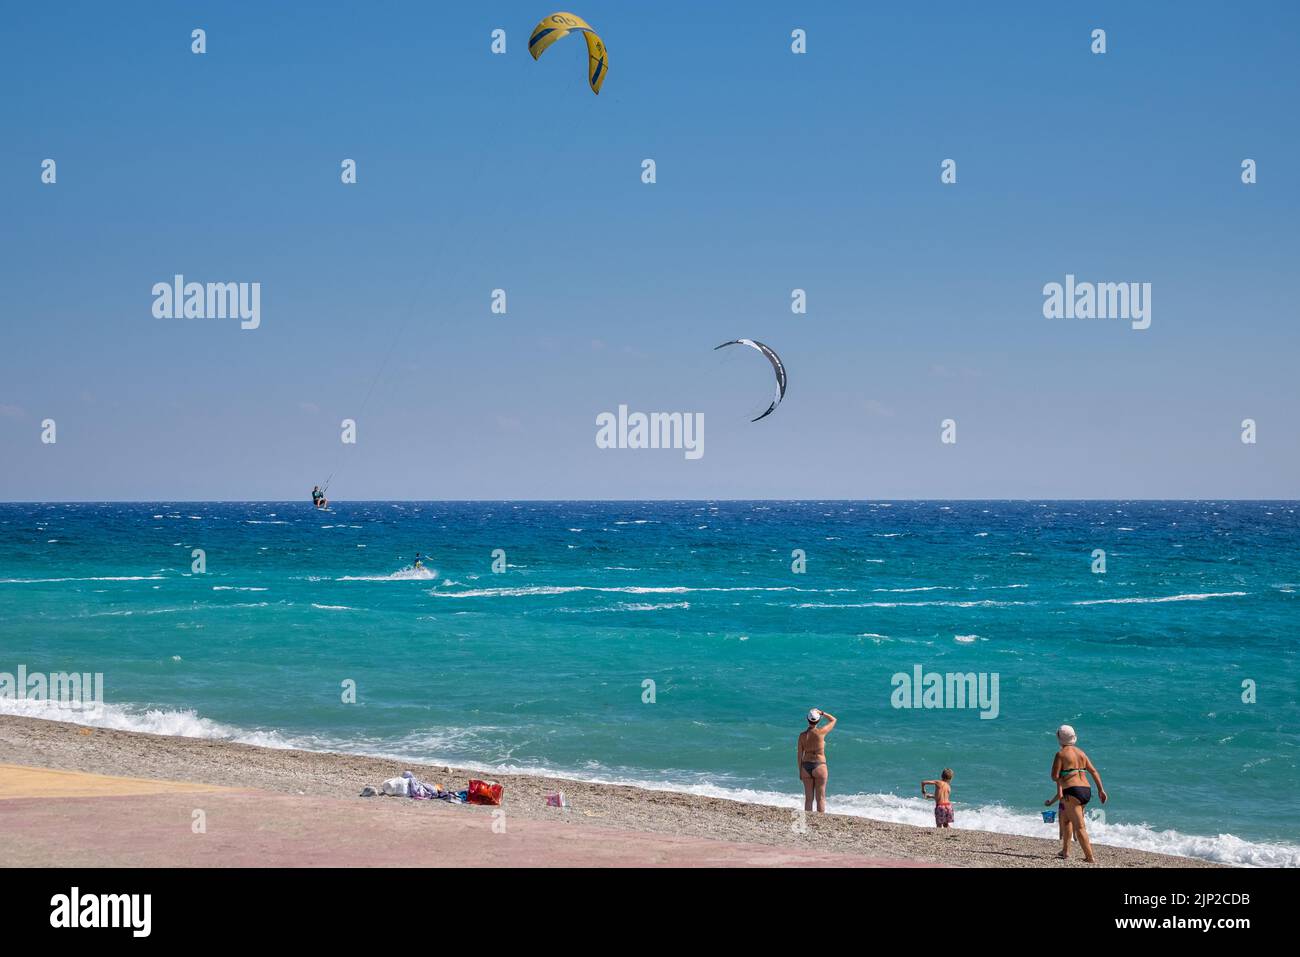 kitesurfers surfing and jumping in the air with people staring of them from the shore of Agiokampos beach,Greece Stock Photo